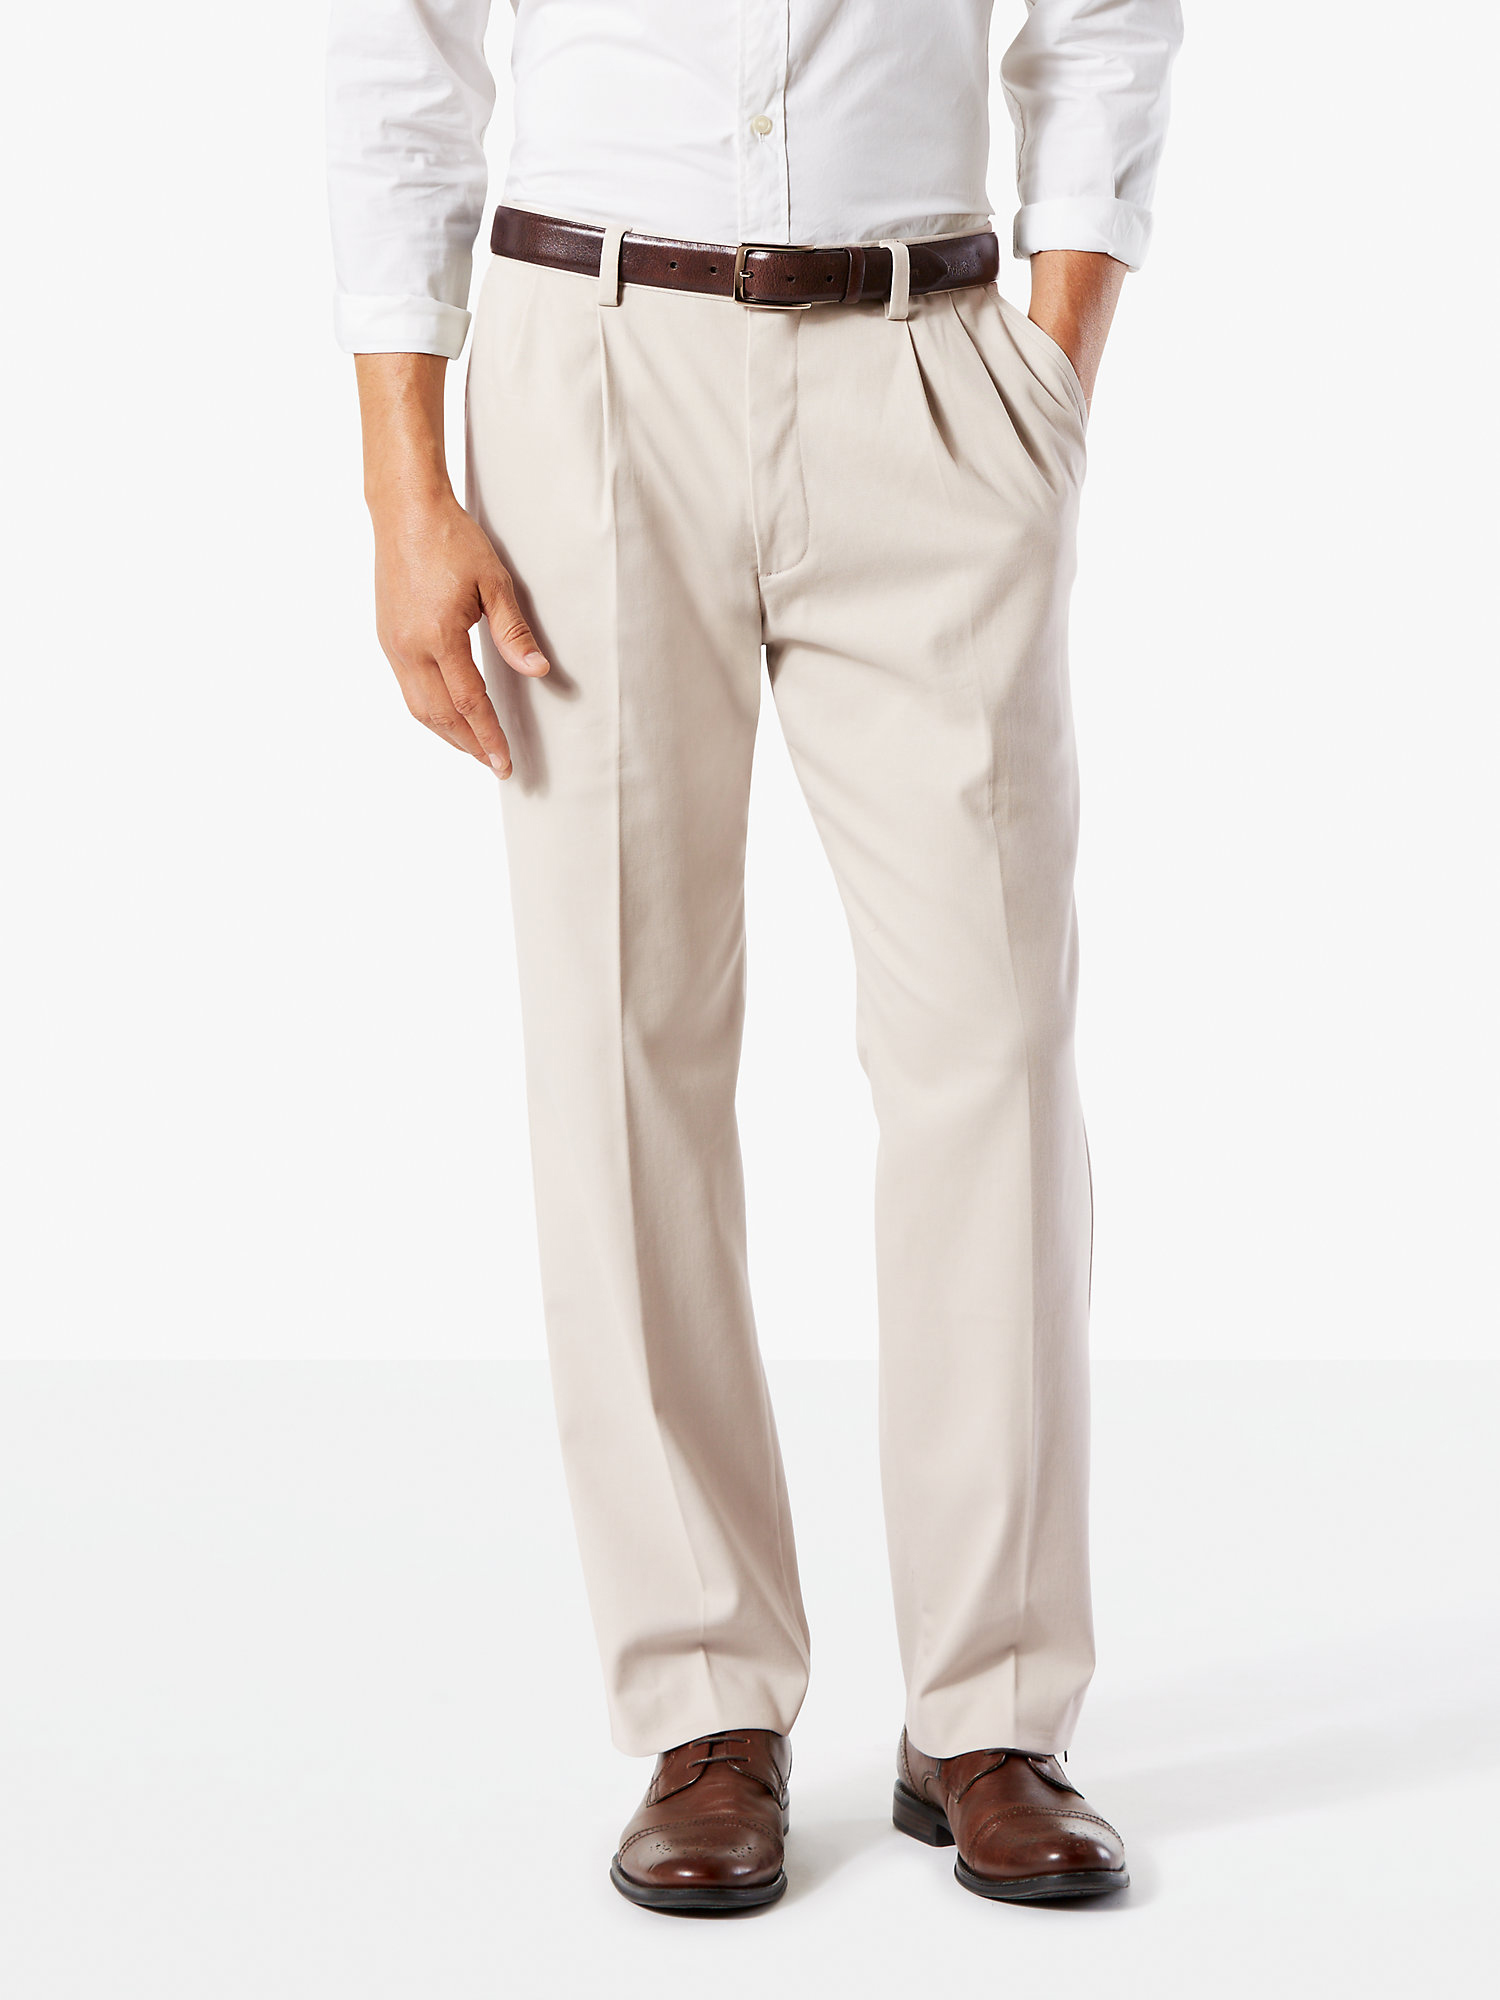 Dockers Men's Classic Pleated Easy Khaki with Stretch - image 1 of 6